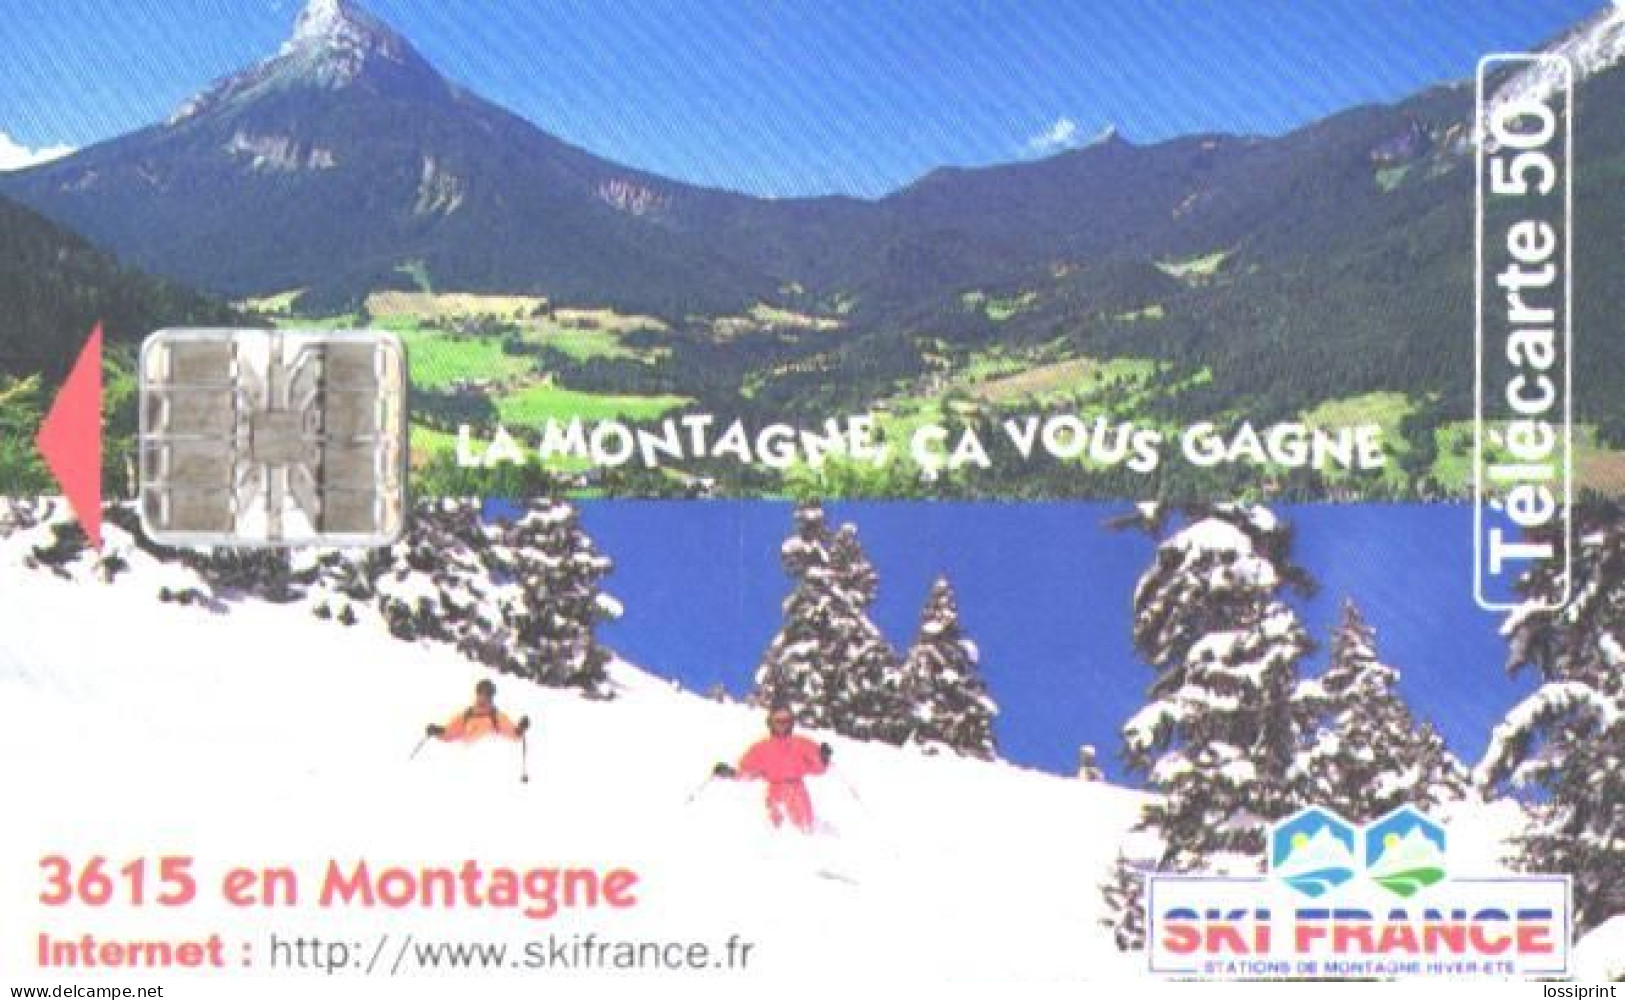 France:Used Phonecard, France Telecom, 50 Units, Mountains, Skiers - Montagnes